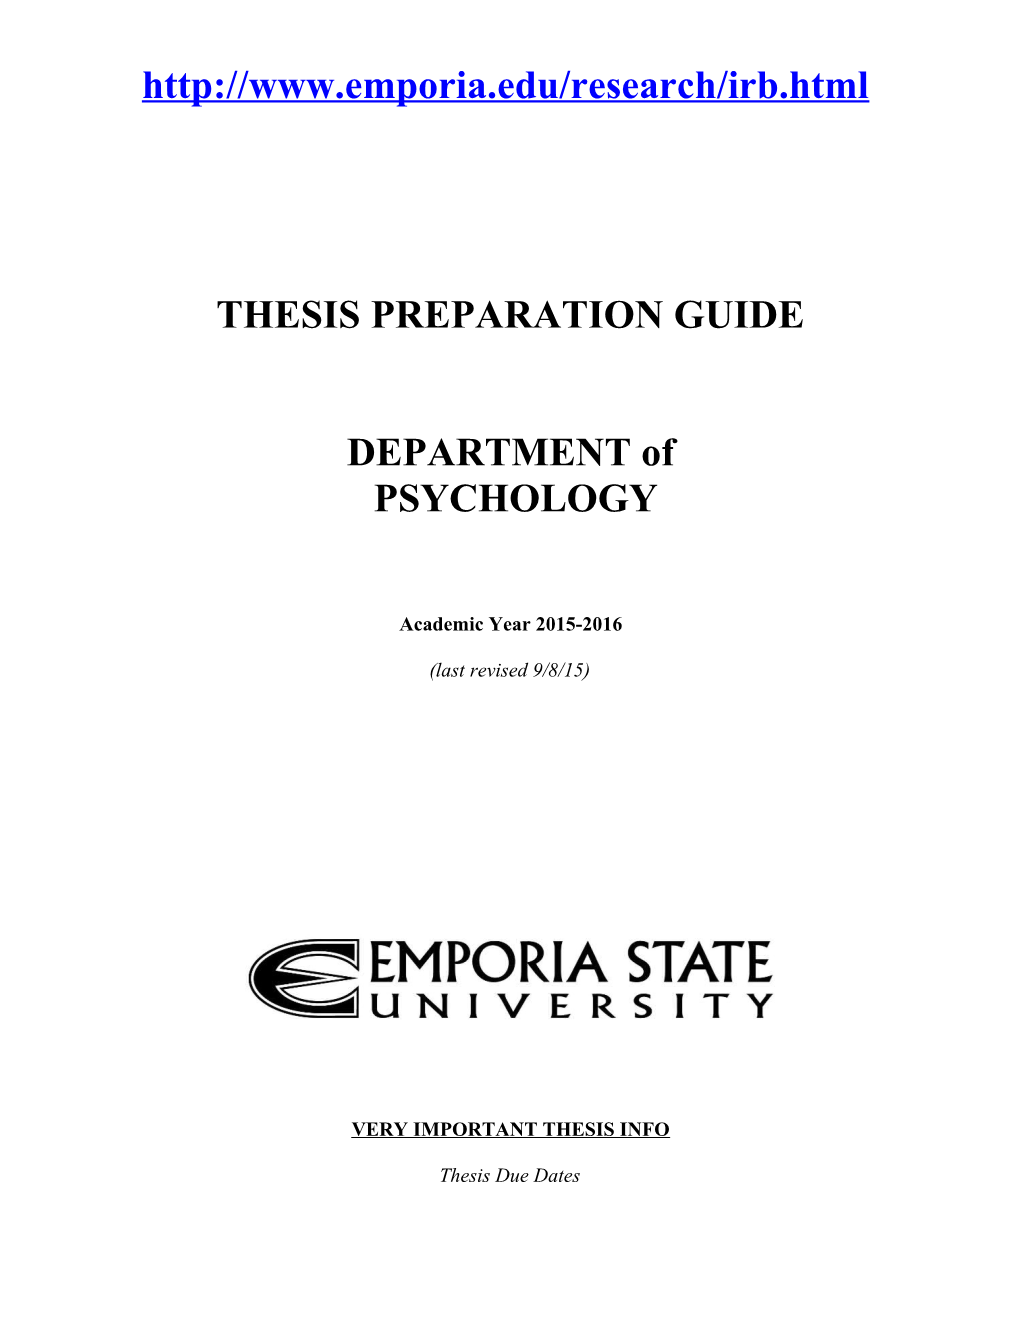 Thesis Preparation Guide